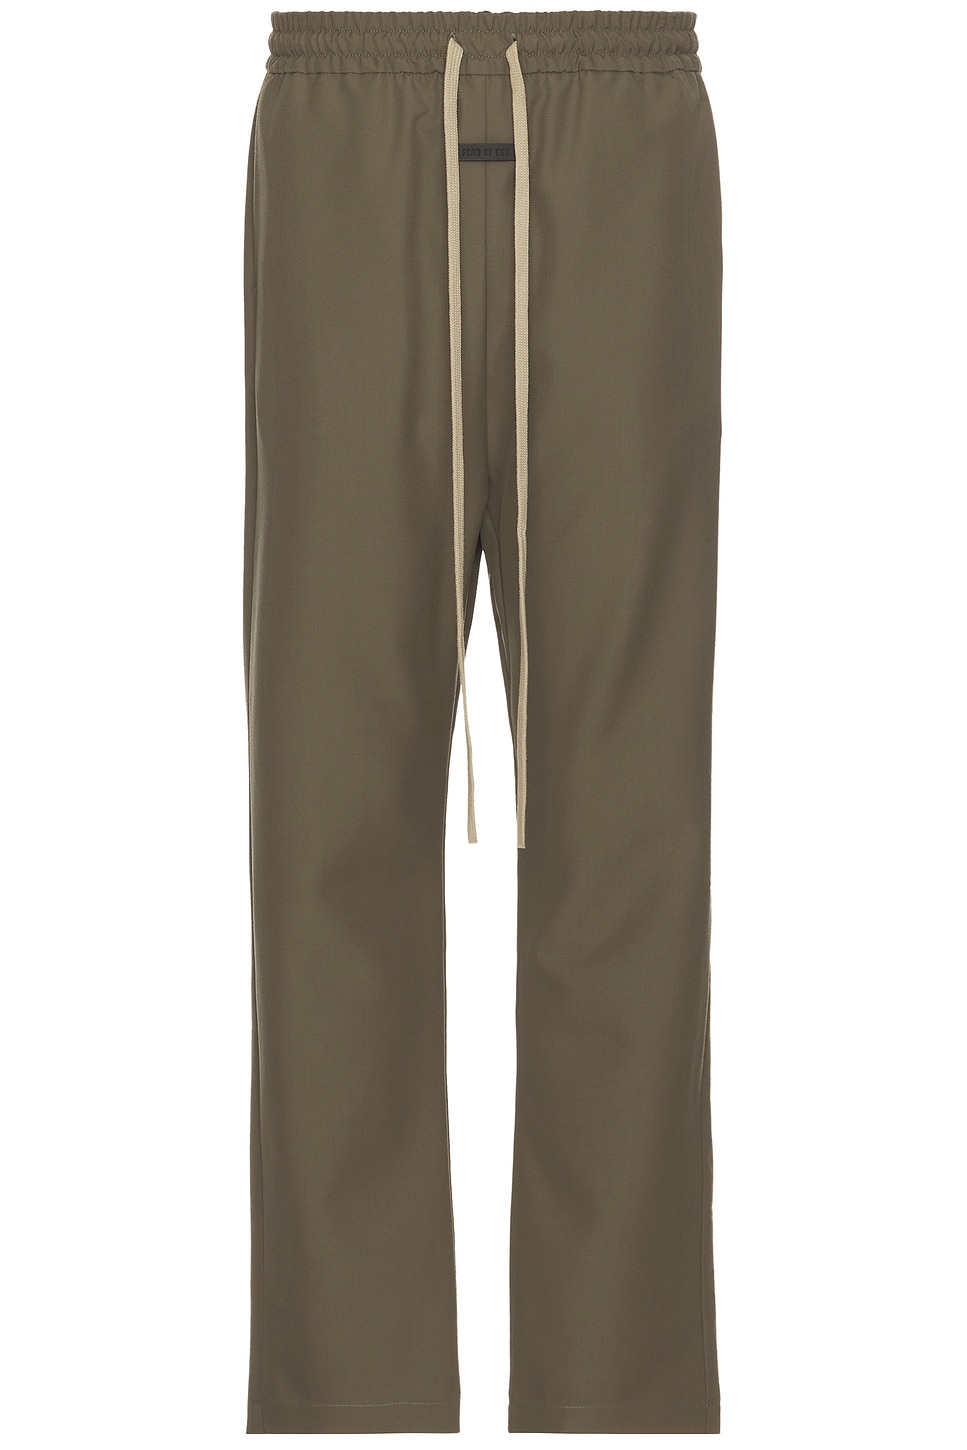 Image 1 of Fear of God Wool Crepe Forum Pant in Wood